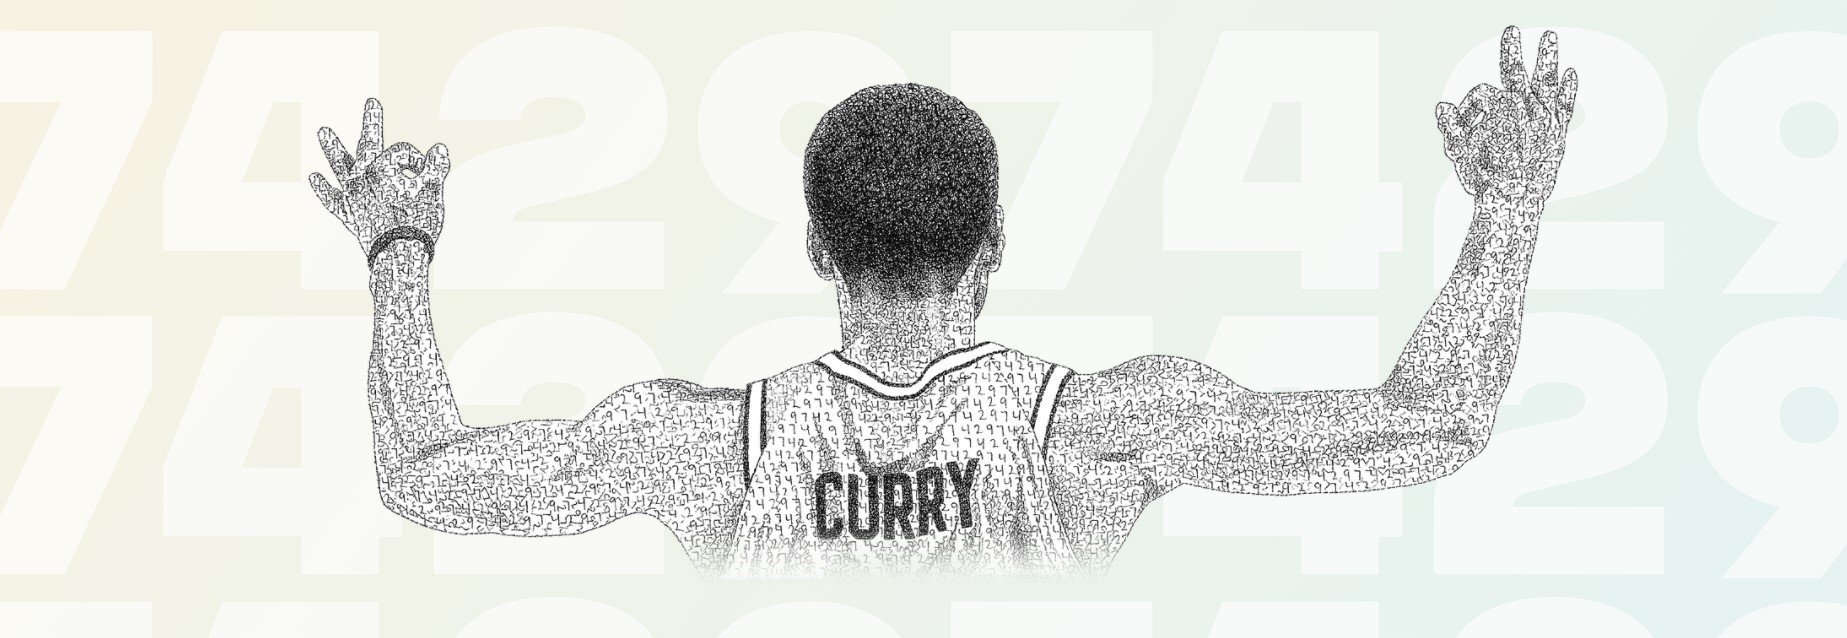 screengrab from Steph Curry's NFT community drop